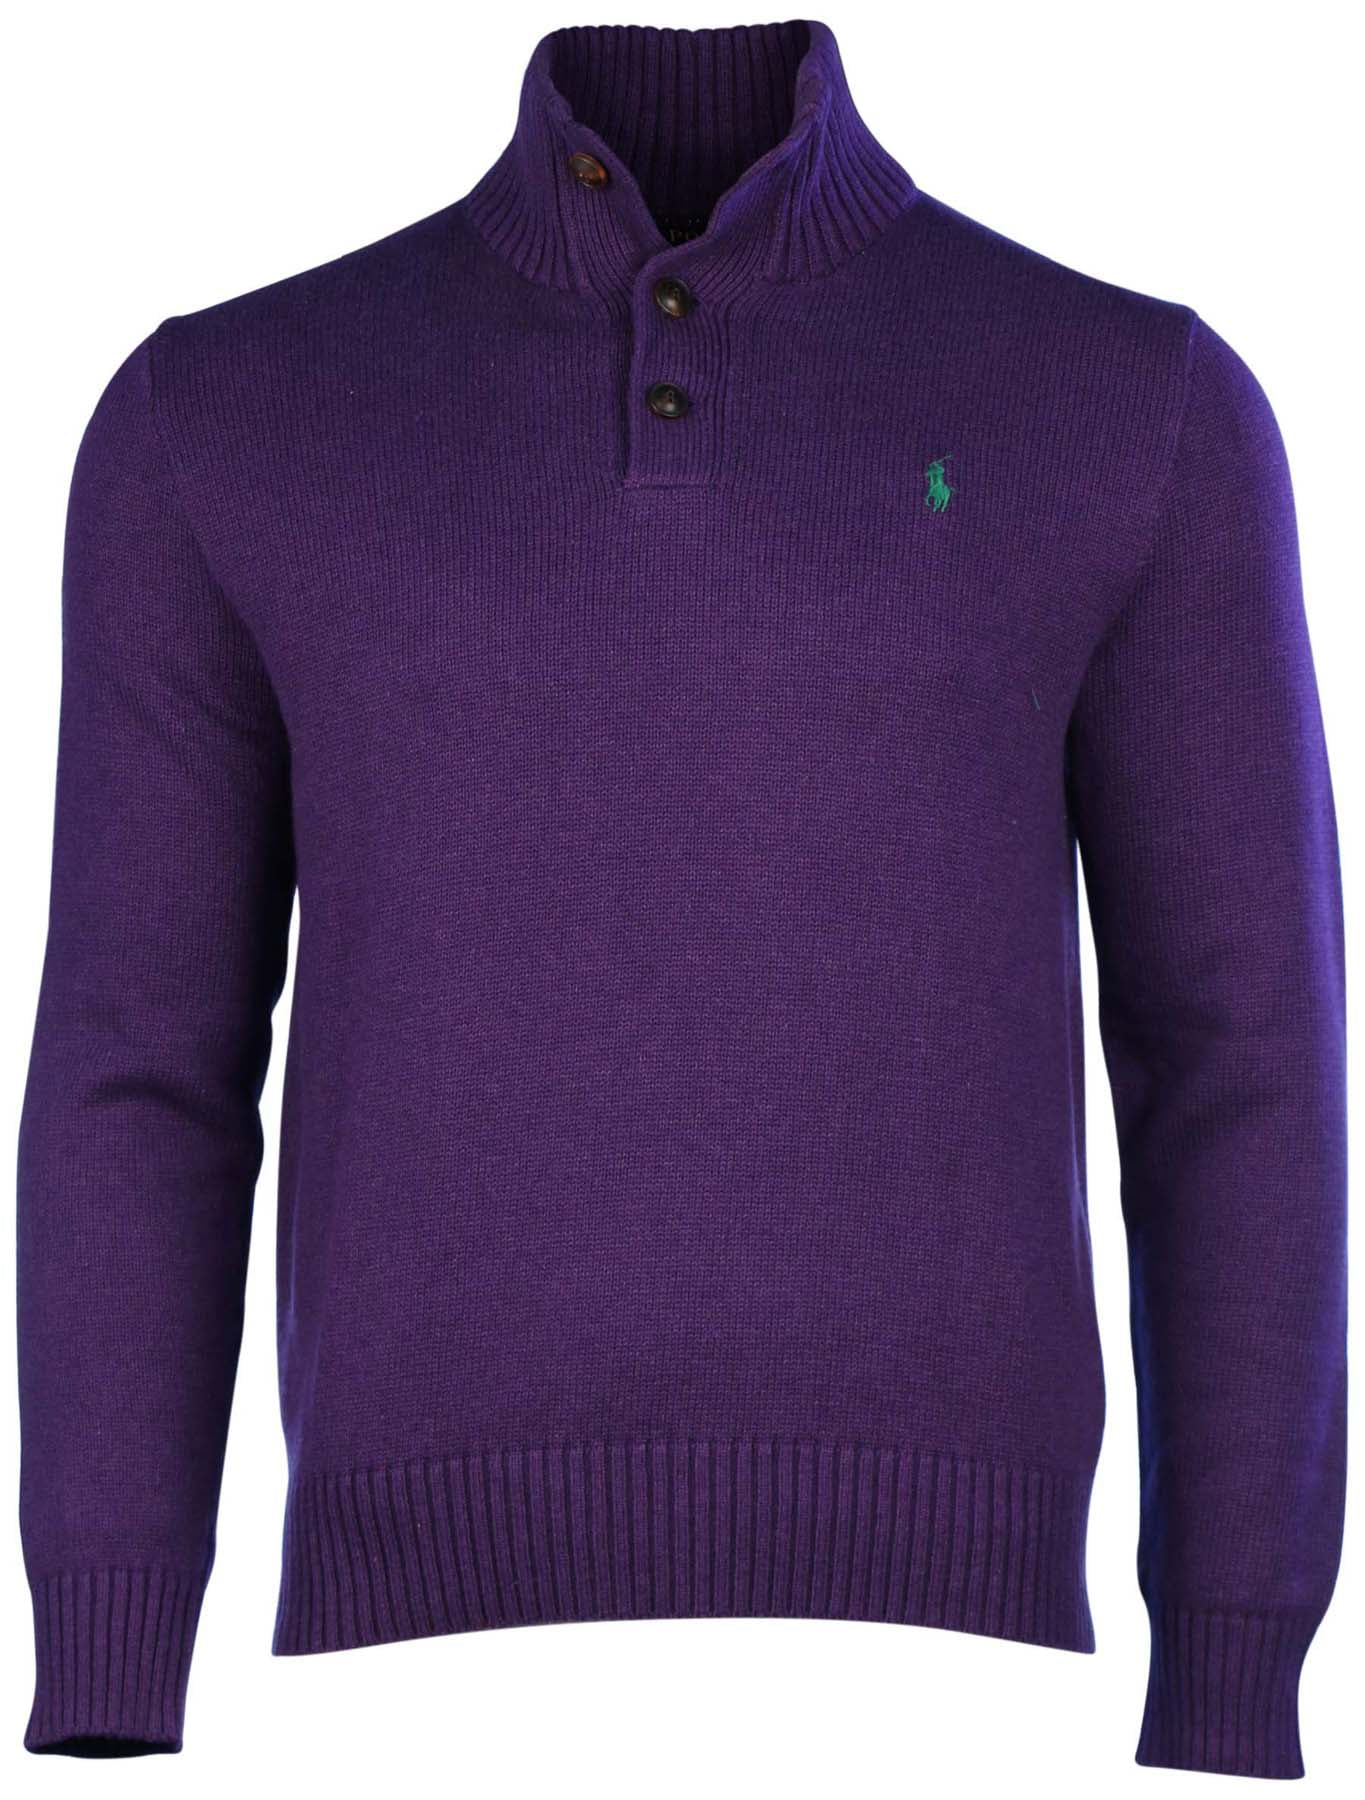 Yayu Men’s Mock Neck Turtleneck Polo Sweater 3 Button Pullover Sweater